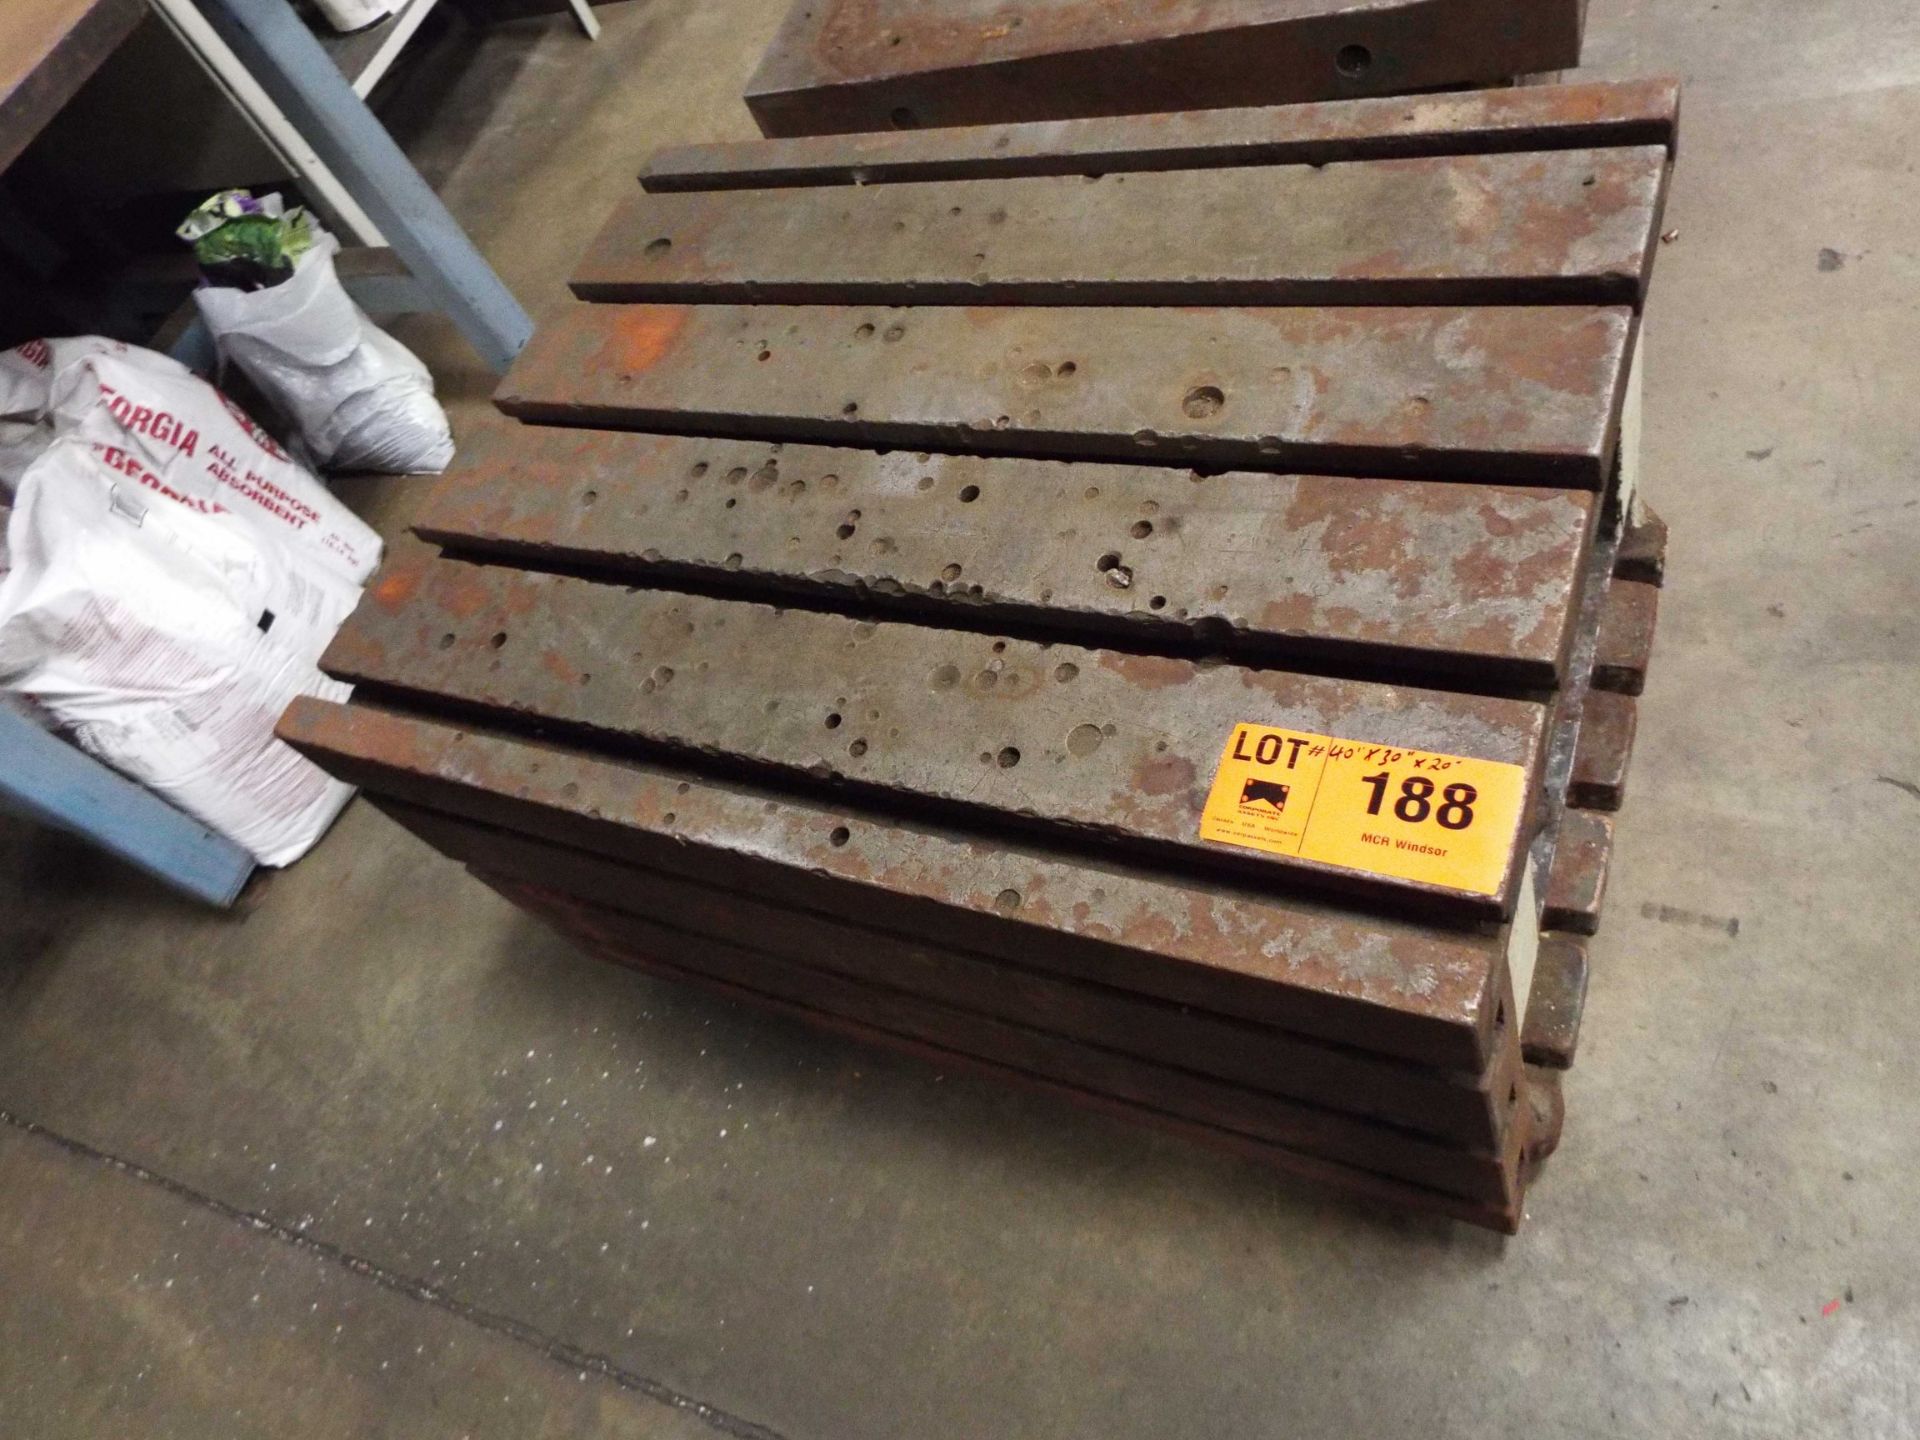 40"X30"20" TEA SLOT BOX TABLE [RIGGING FEE FOR LOT #188 - $50 USD PLUS APPLICABLE TAXES]